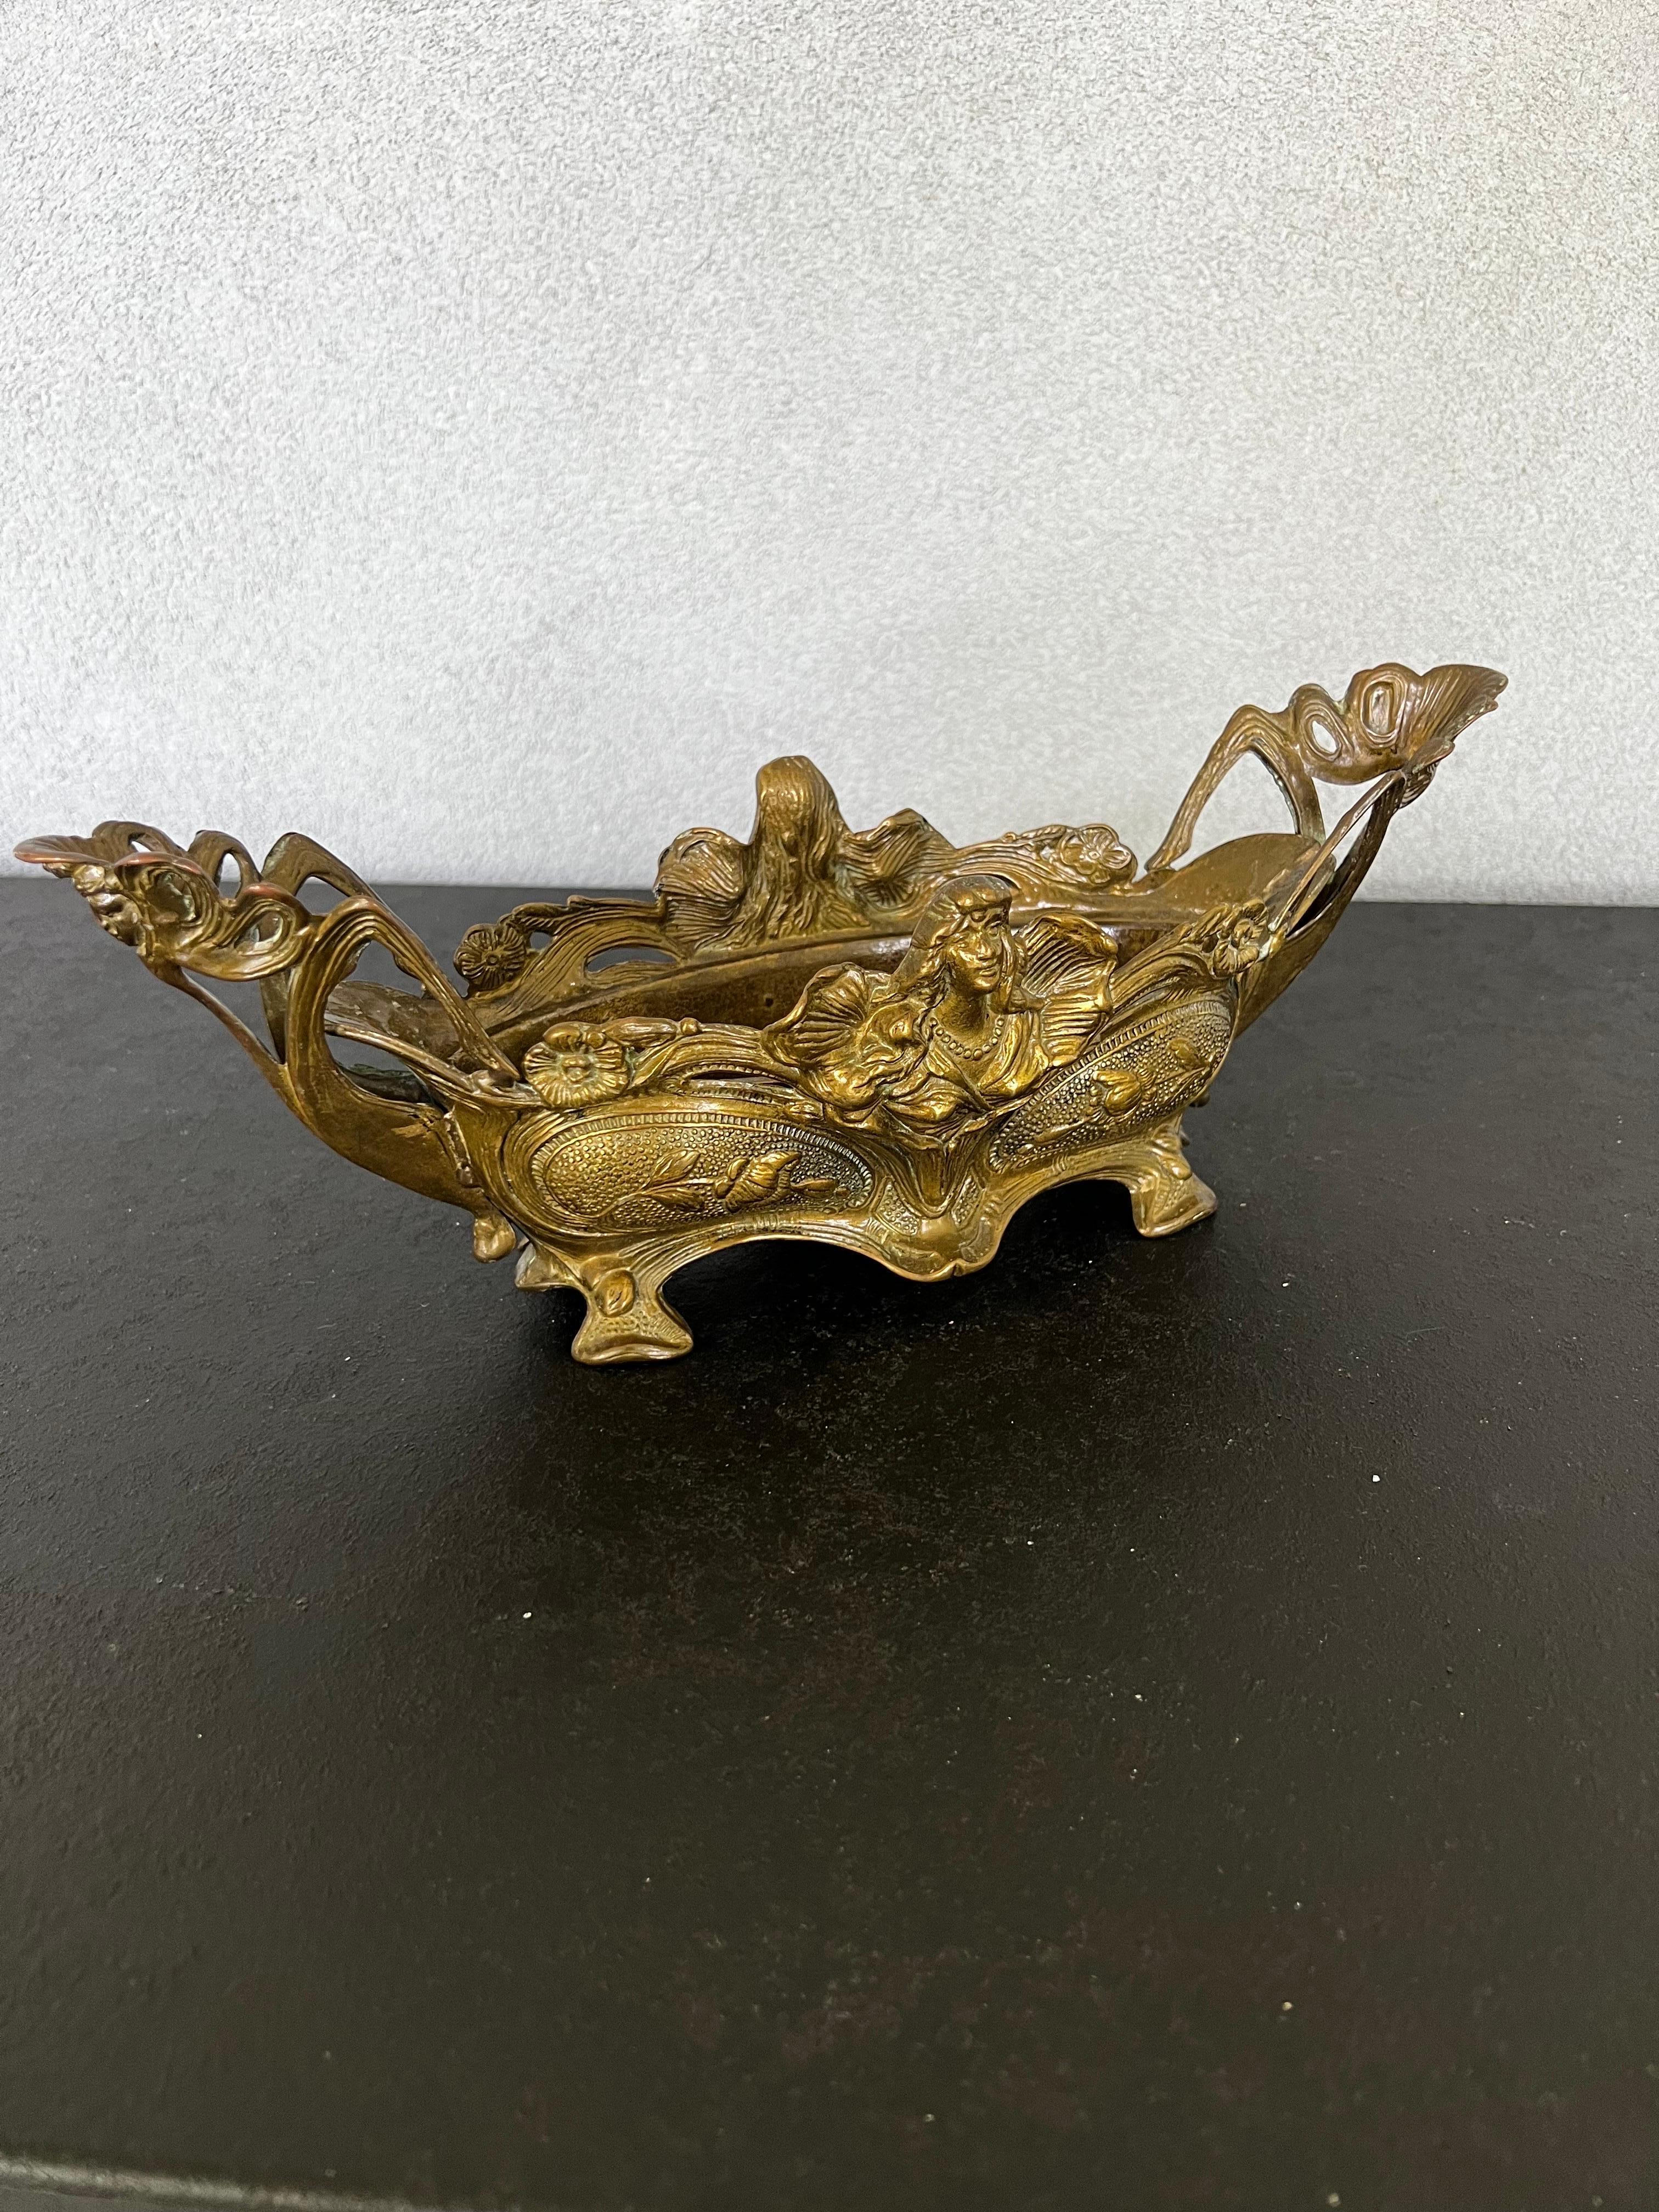 Stunning Bronze Art Nouveau French Jardiniere with removable insert. Exquisite details that shows the level of high quality of metalworkers of the period 
This small piece would be perfect for a fireplace mantel, a bookcase an entry console table or